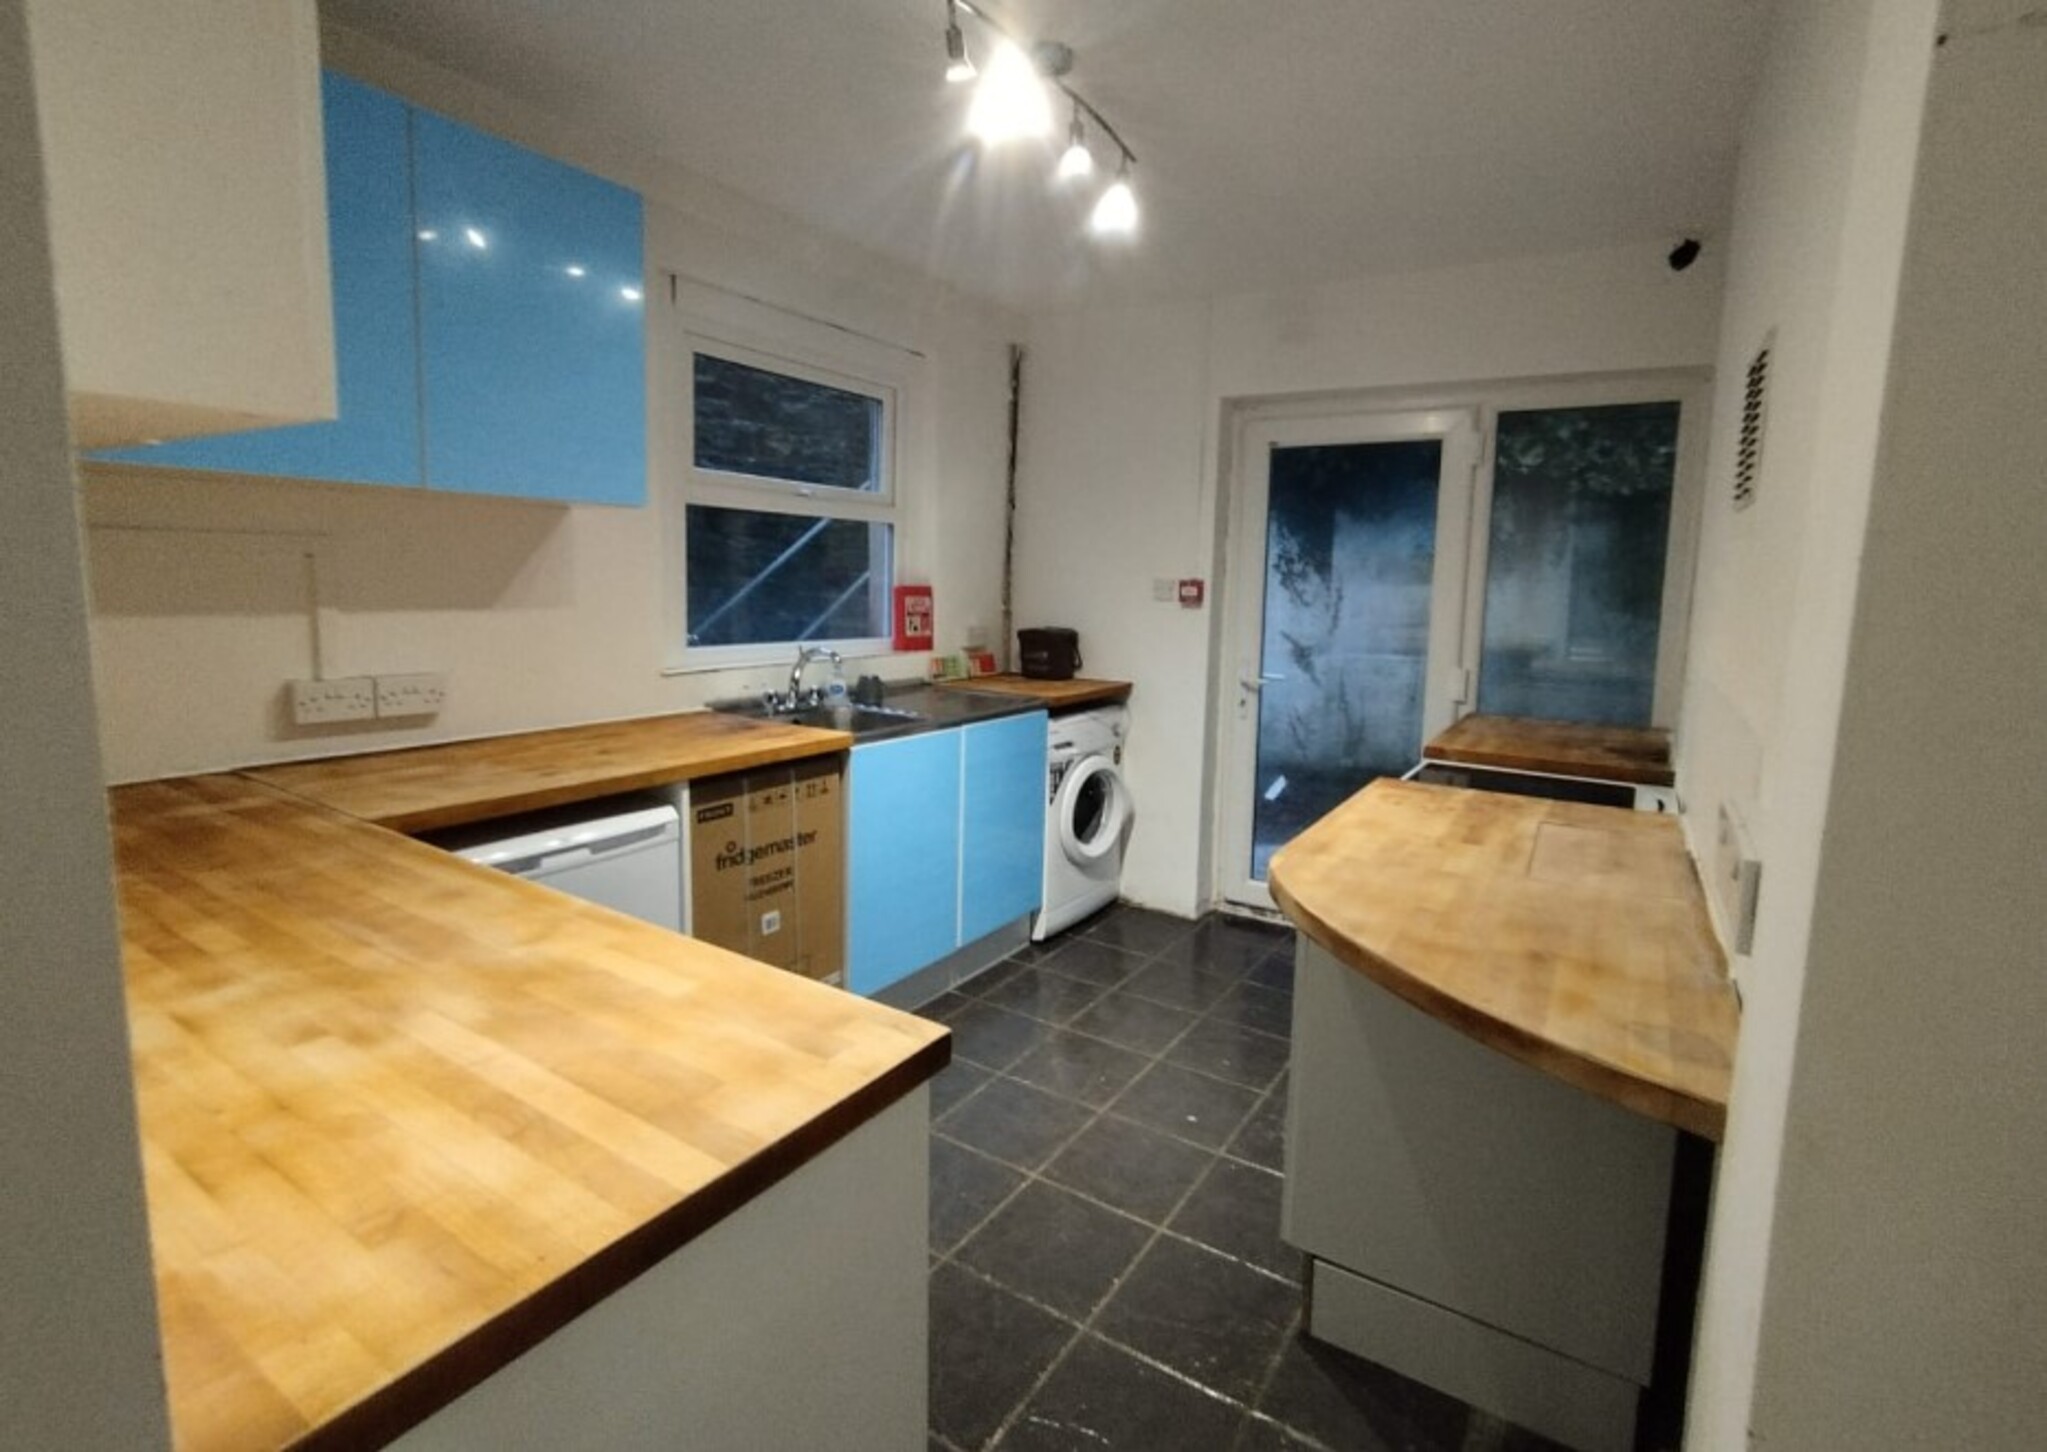 4 bed End of Terrace for rent in Swansea. From Mirador Property Lettings - Swansea